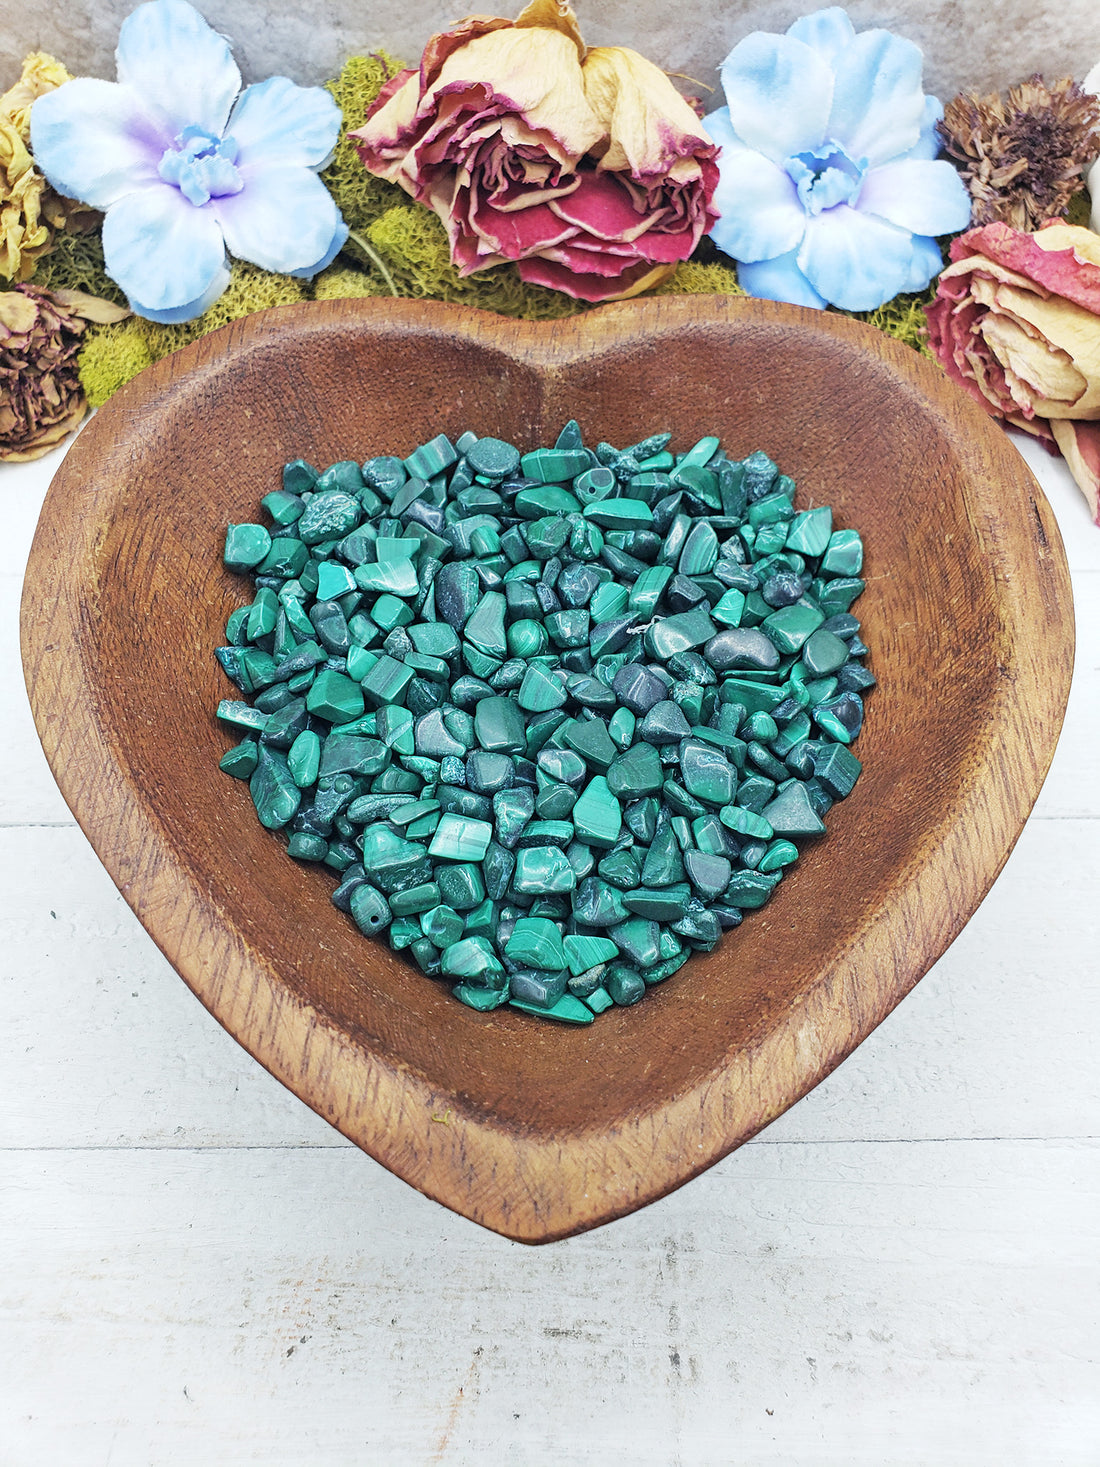 malachite crystal chips in heart bowl